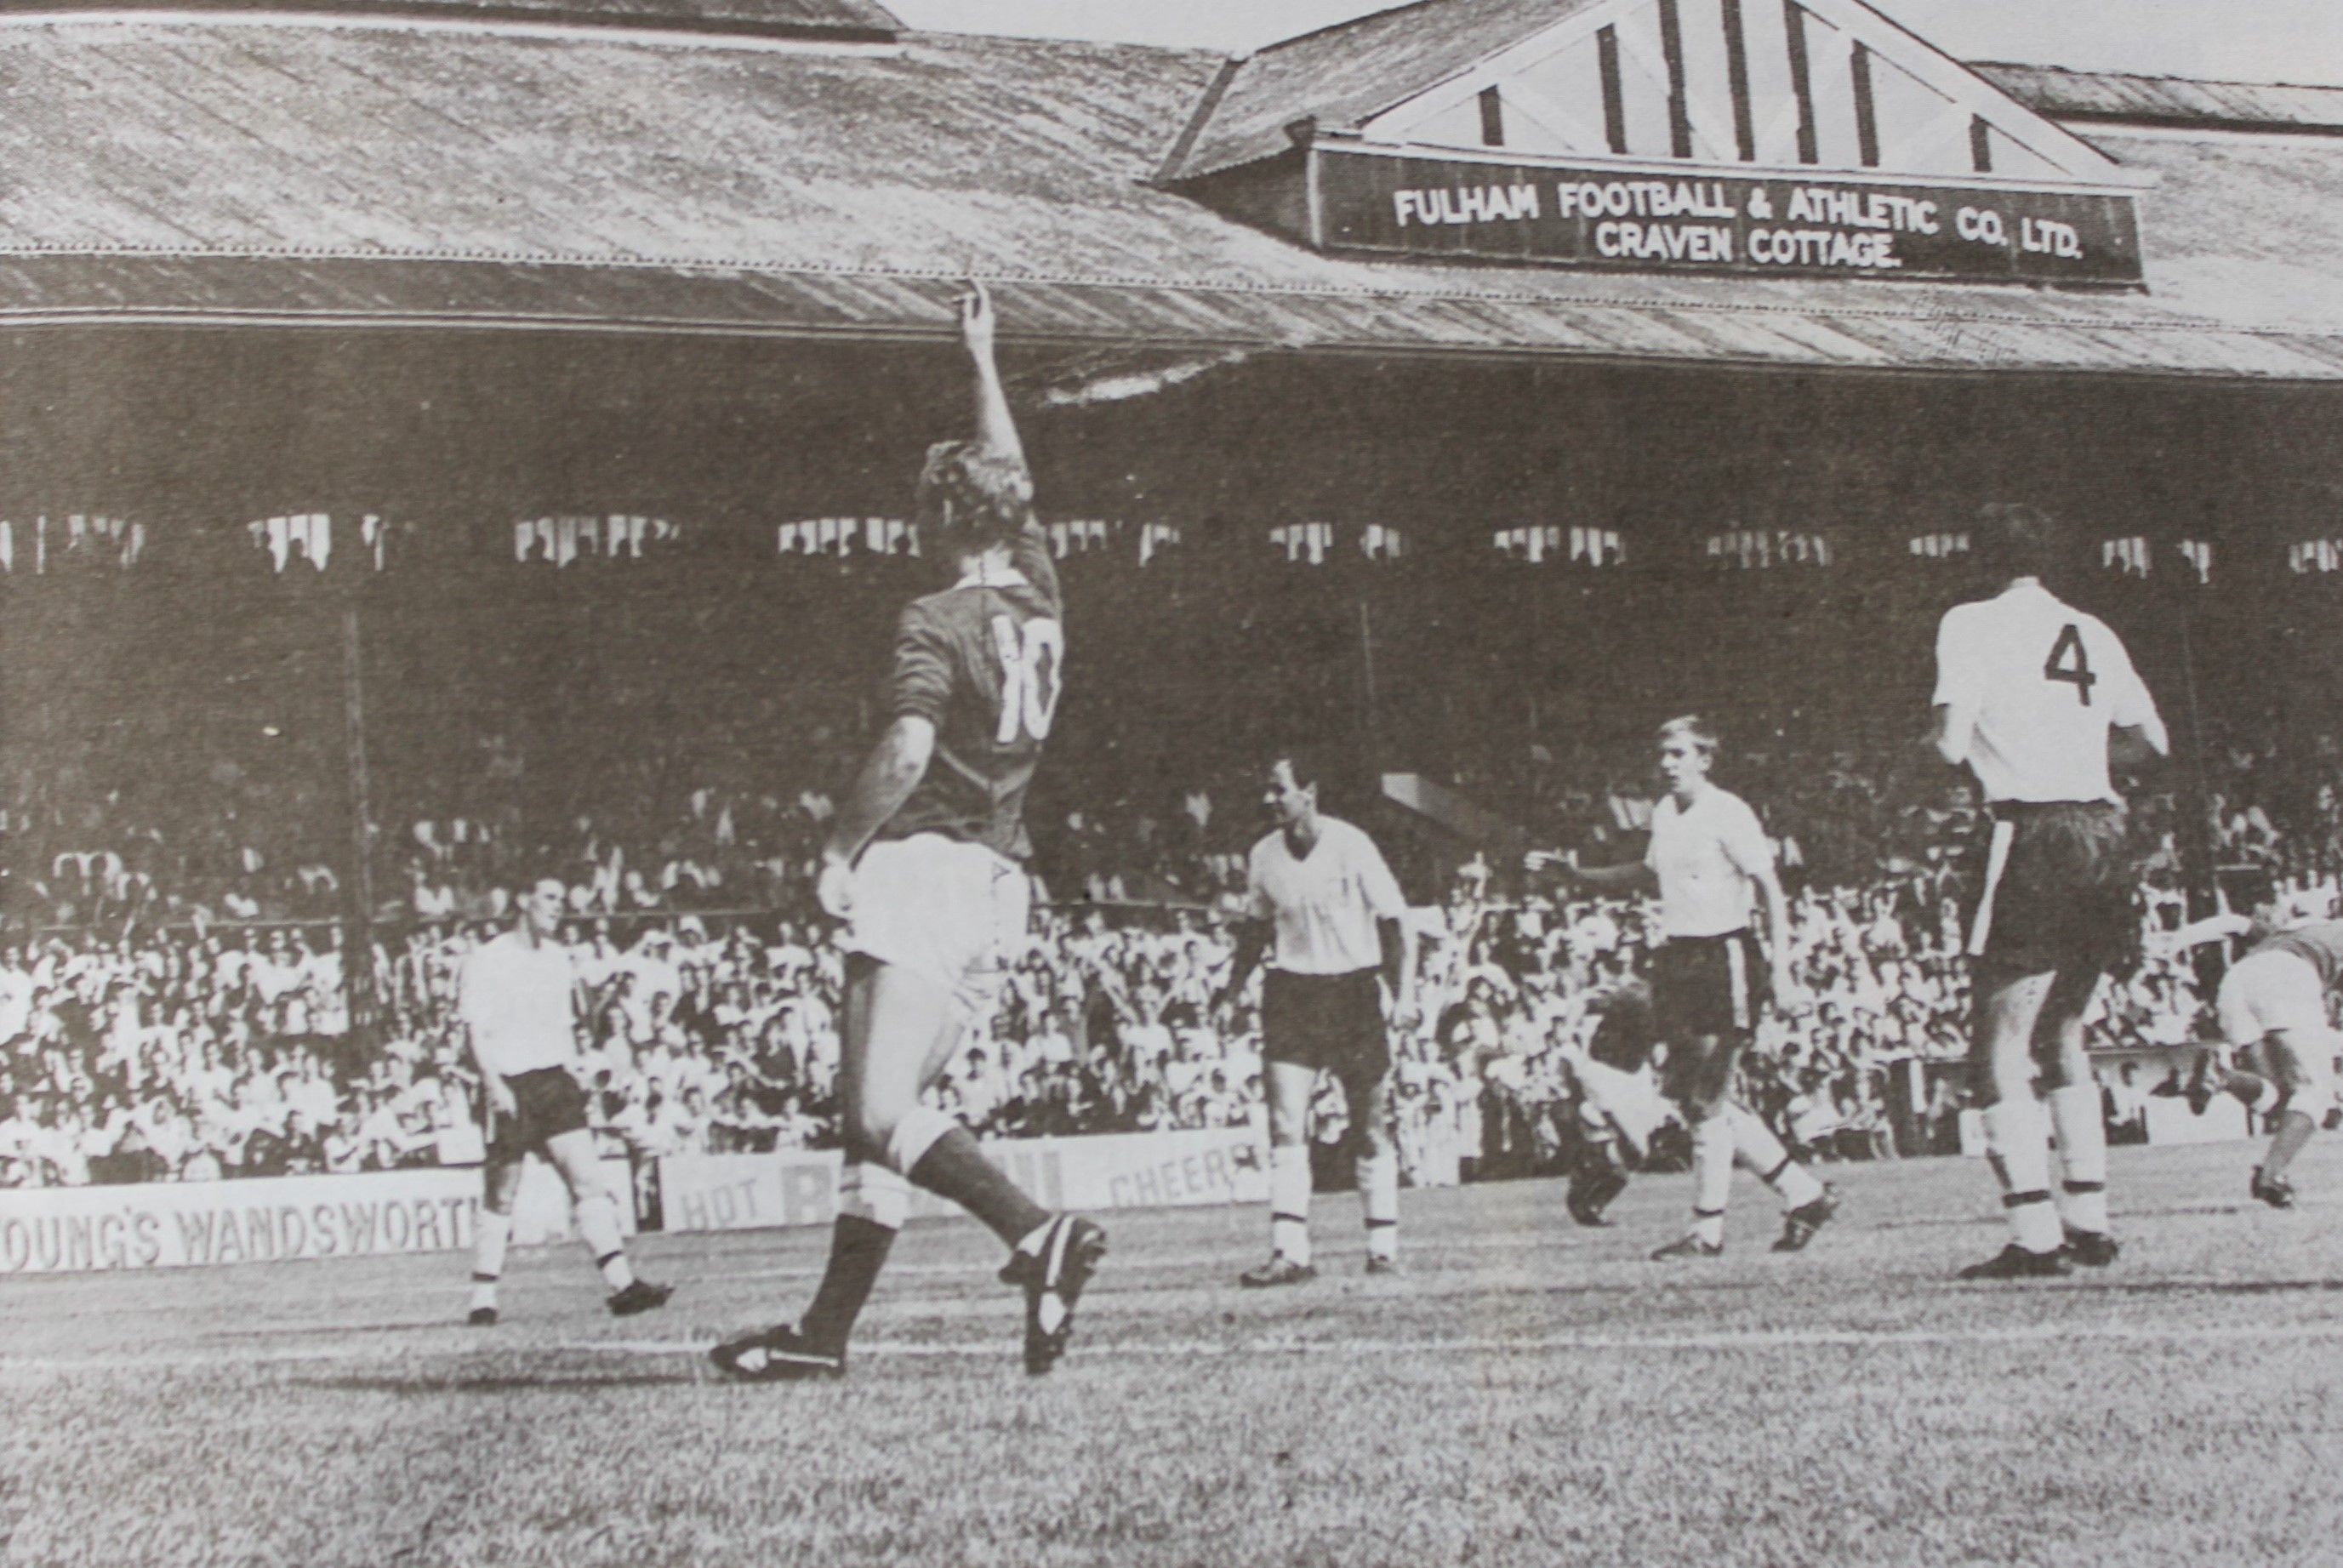 1187 20.06.66 Ball v Fulham (A) SECOND IN SEQUENCE - Alex Young acclaims Alan Ball's goal as t...JPG